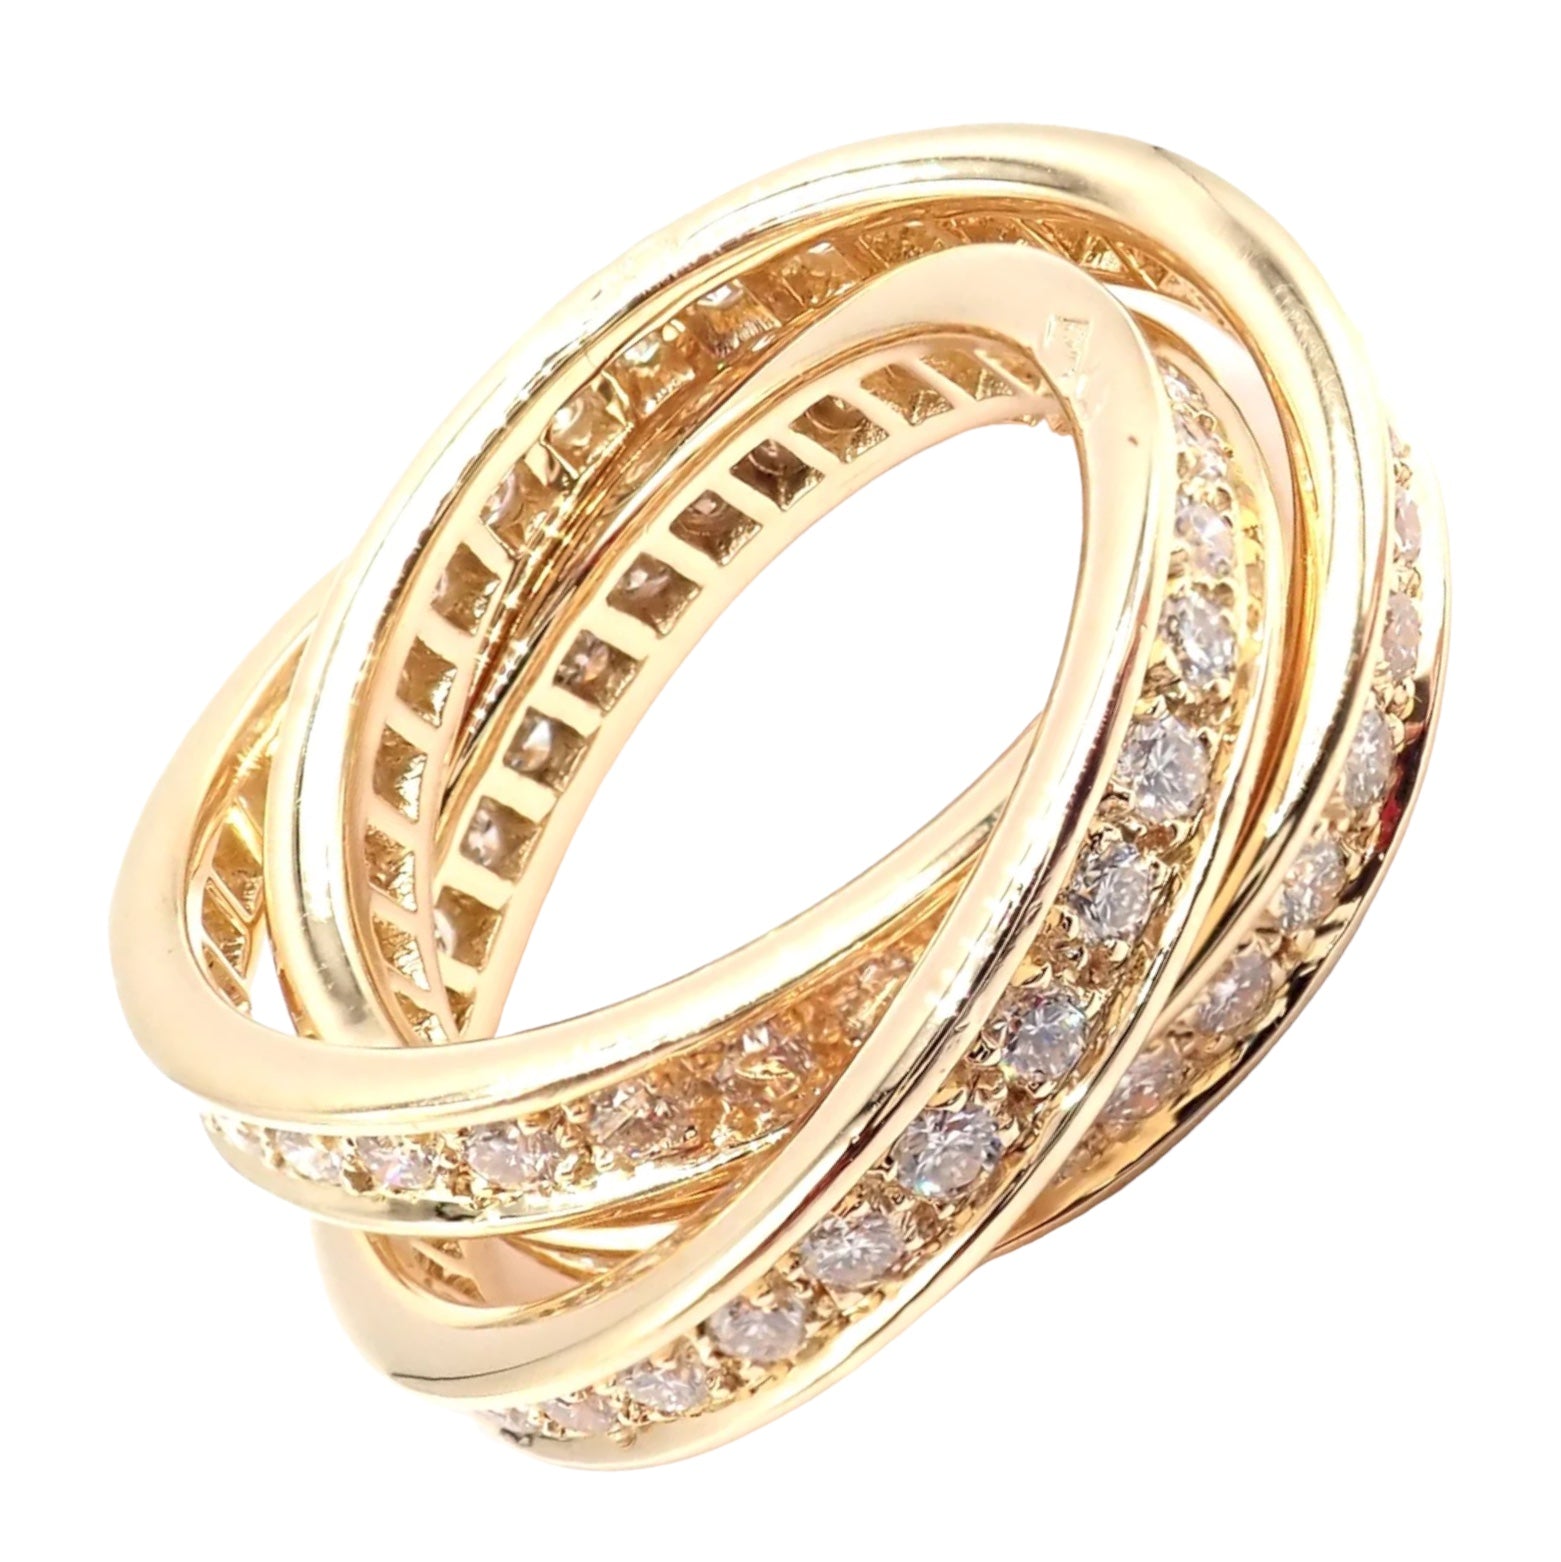 Authentic! Cartier 18k Yellow Gold Diamond Trinity Band Ring Size 5 3/4 Paper